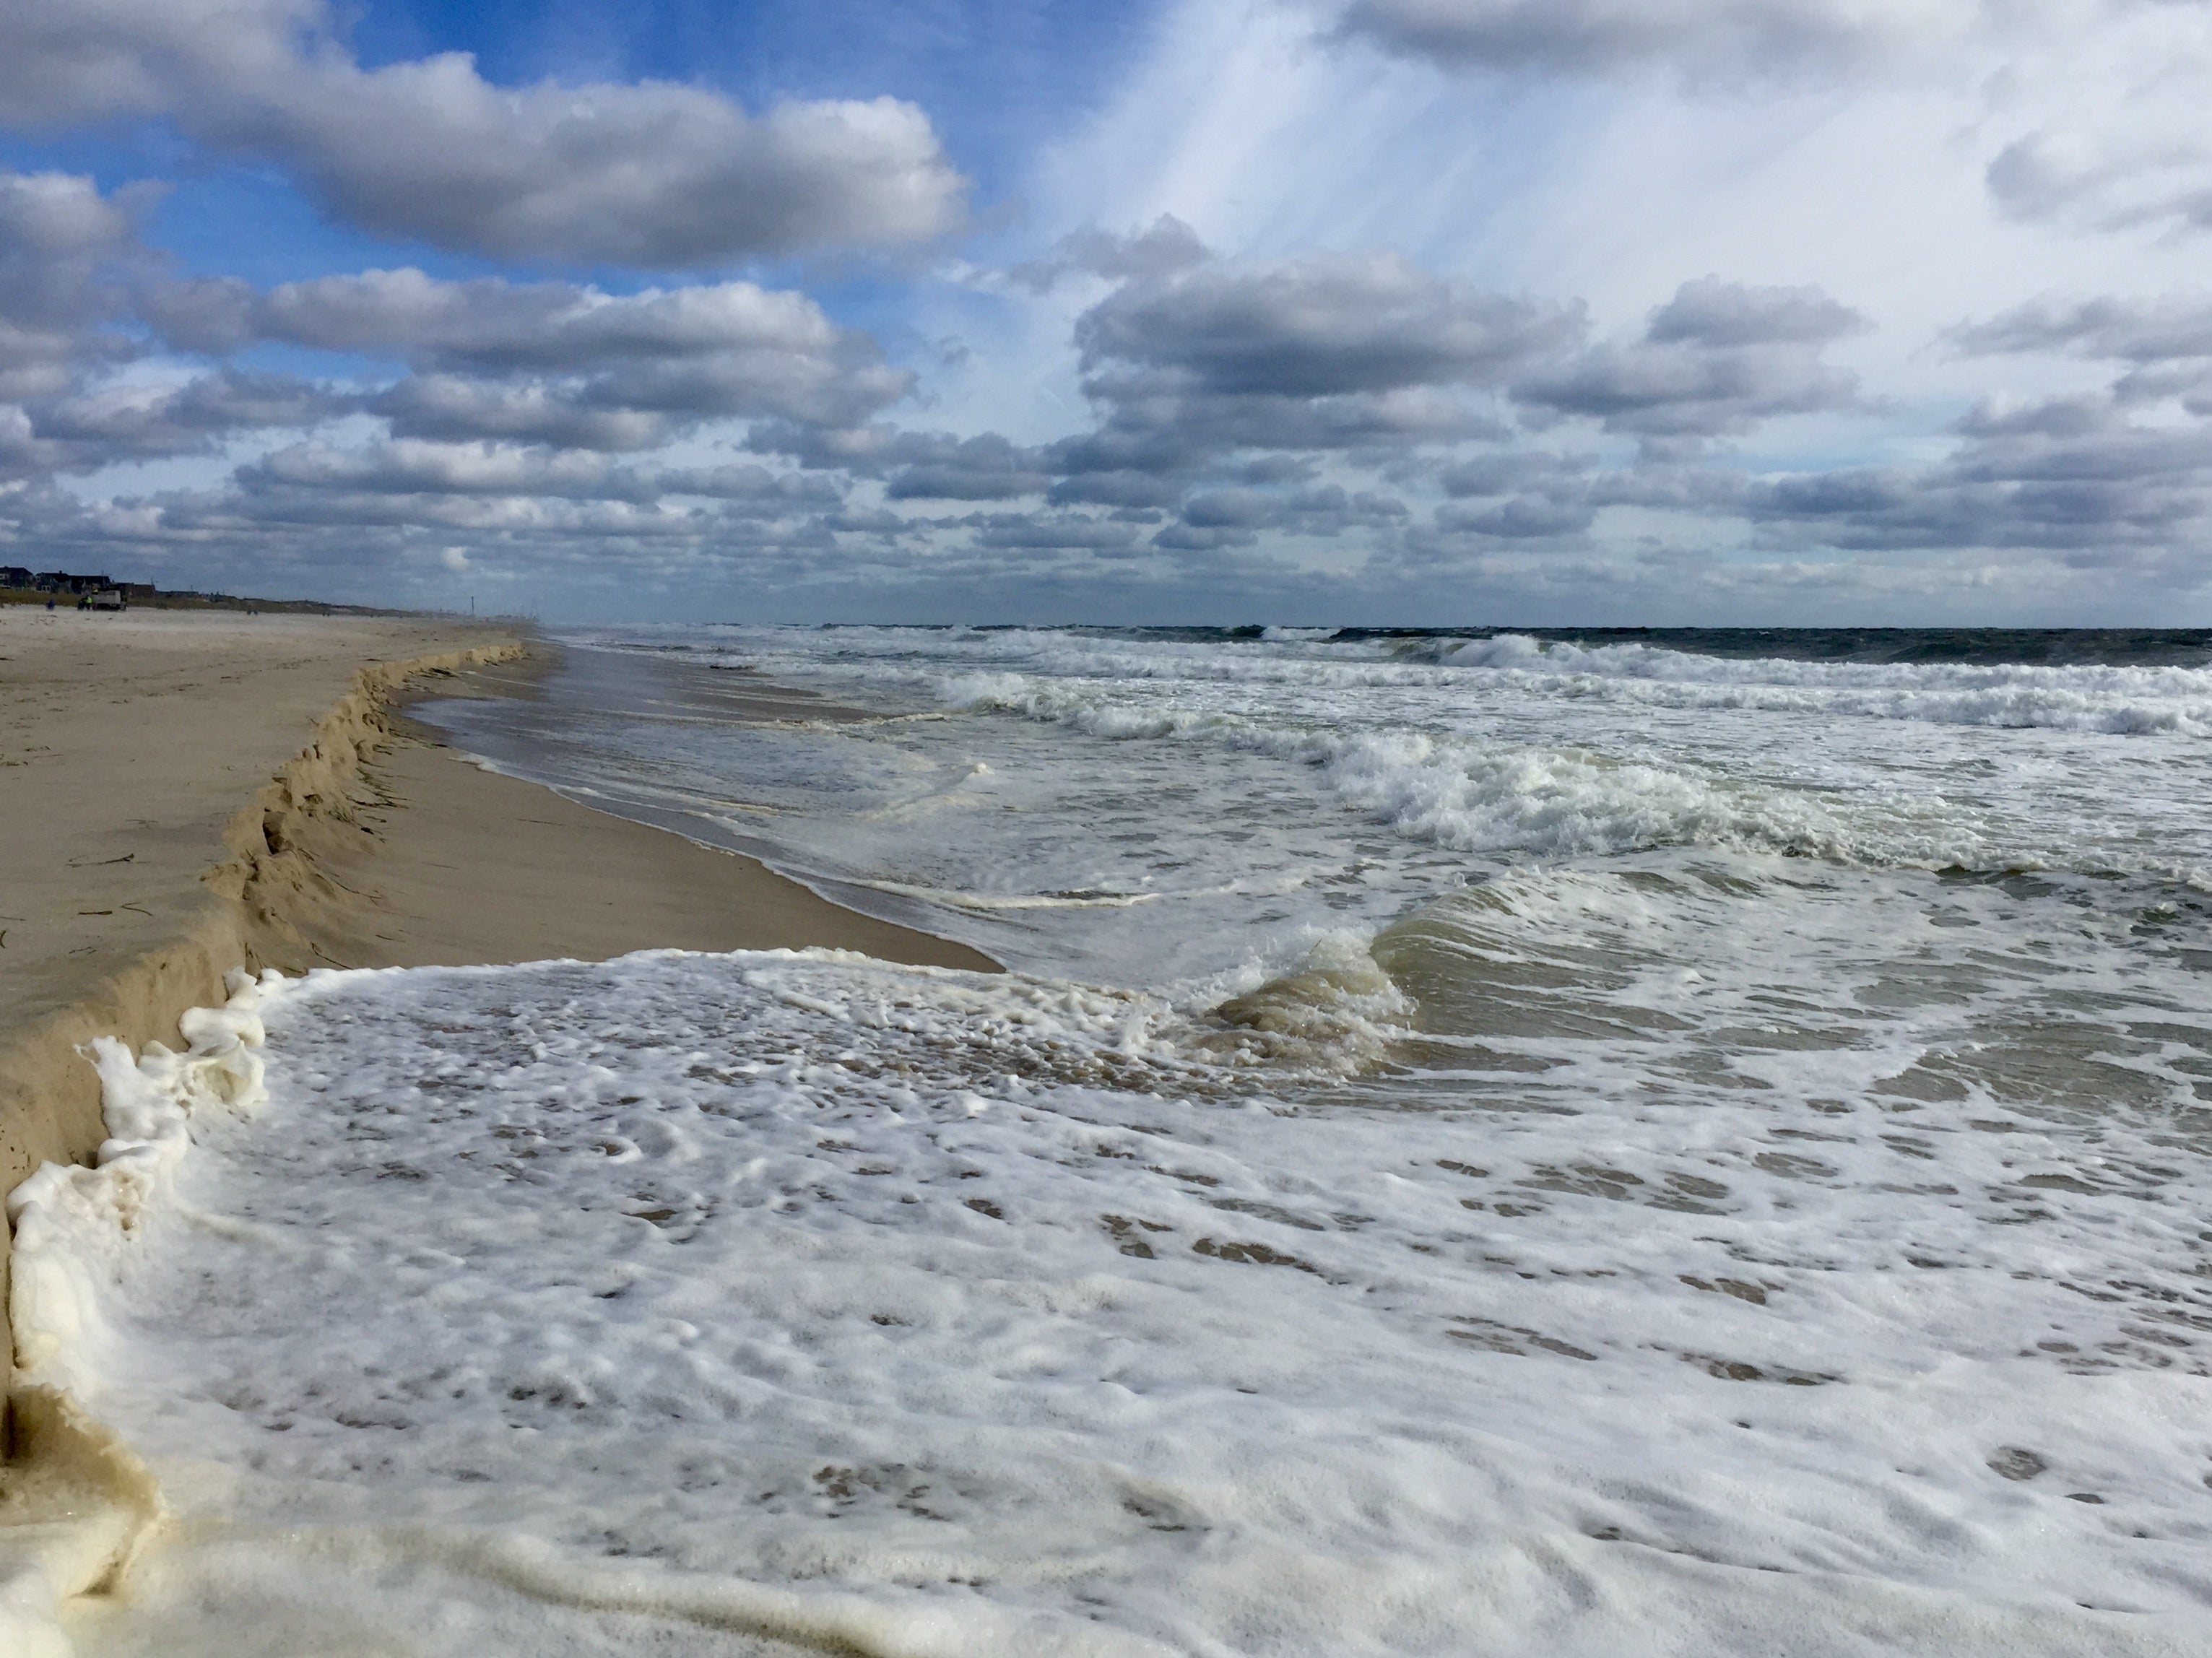  Rough ocean conditions Monday morning in South Seaside Park. (Photo: Justin Auciello/for NewsWorks) 